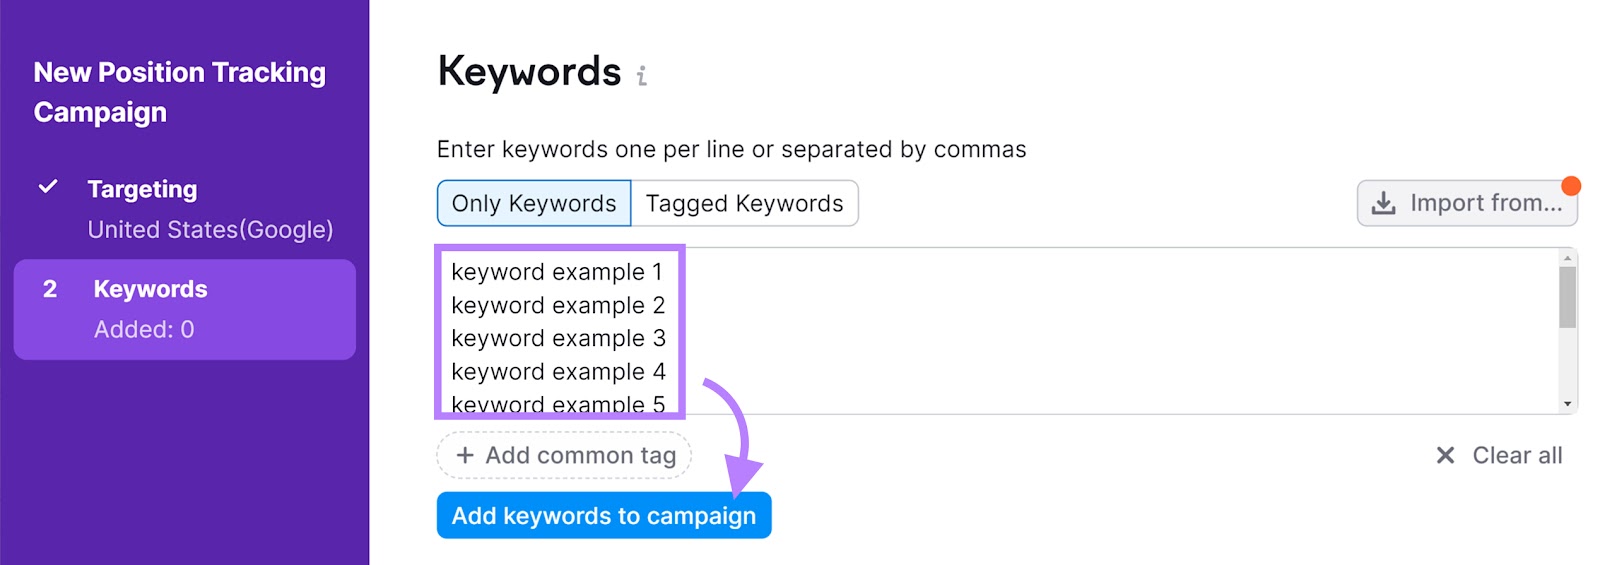 "Keywords" tab of the Position Tracking tool with the "Add keywords to campaign" button highlighted.